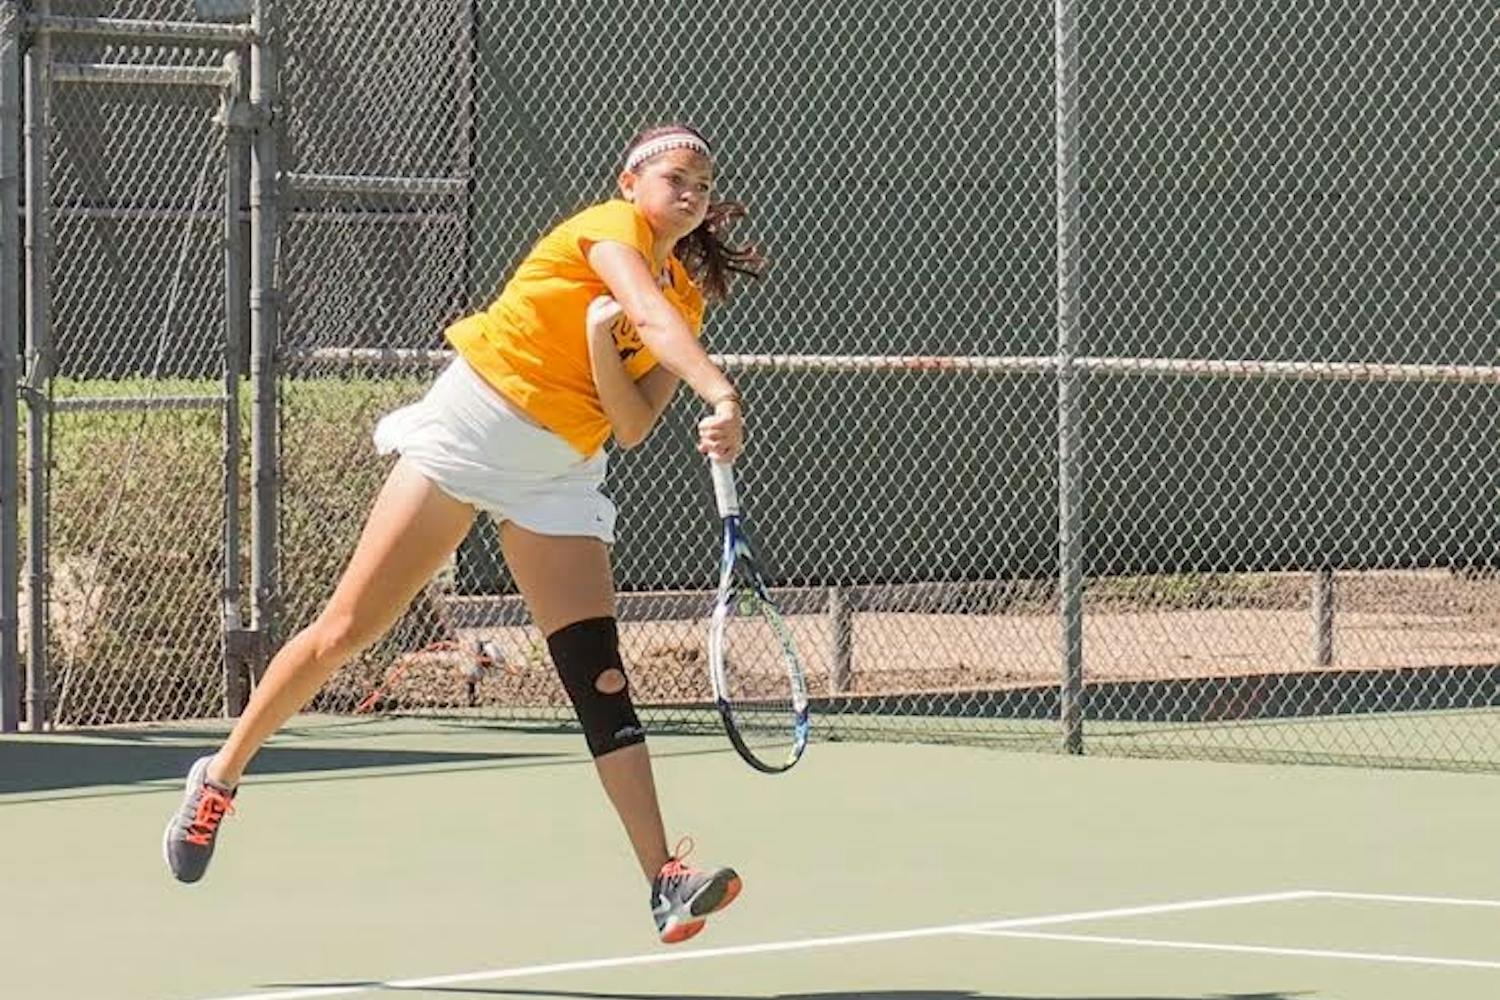 Senior Leighann Sahagun returns the serve to San Jose State during a doubles match with Sun Devil partner, Joanna Smith, Friday, March 20, 2015, at Whiteman Tennis Center in Tempe. (J. Bauer-Leffler/The State Press)